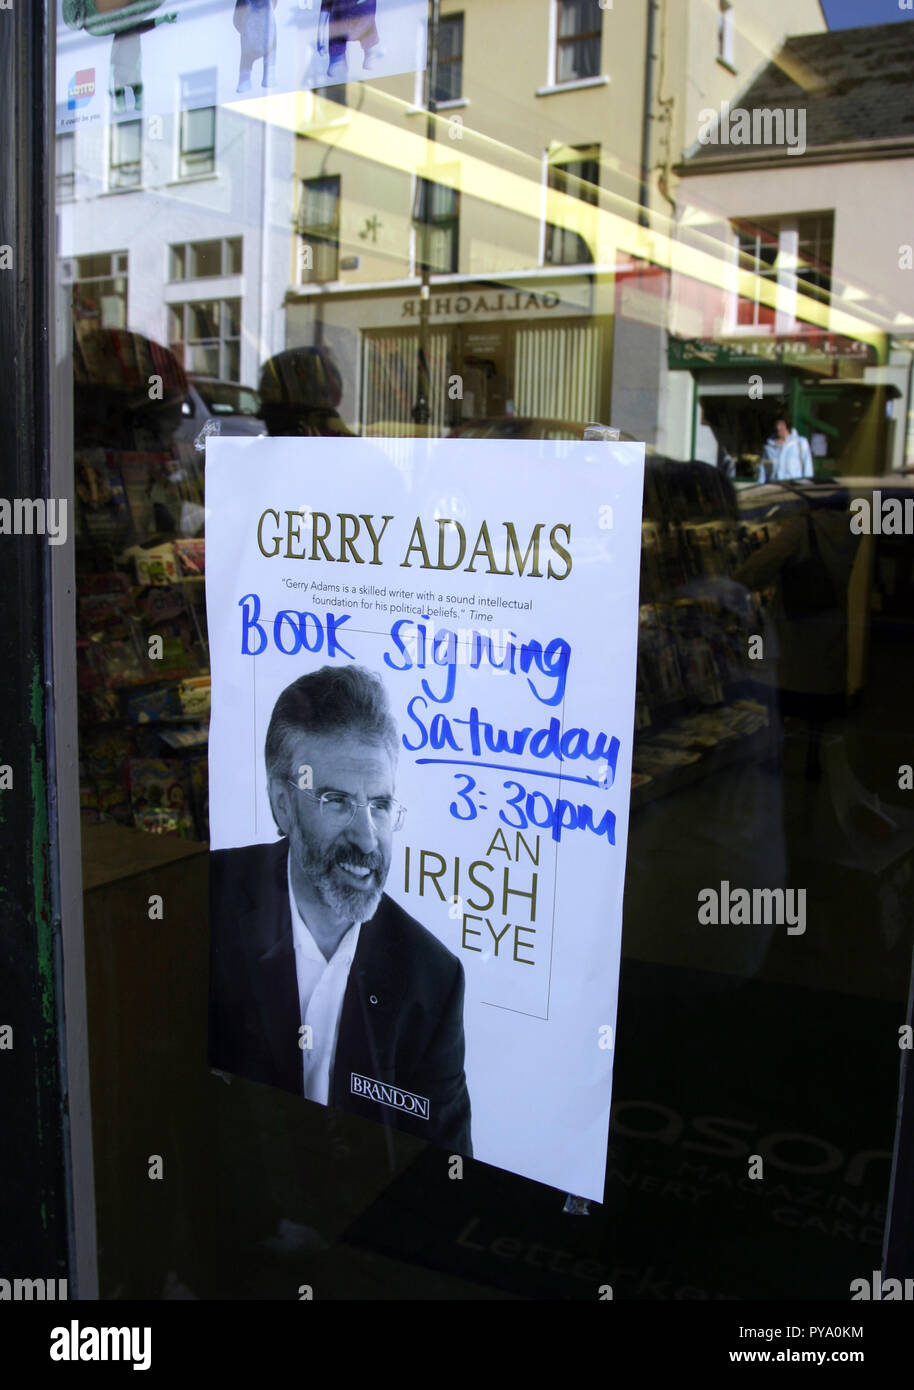 A poster in a shop window is advertising a book signing session with Gerry Adams in the town of Portrush in Northern Ireland in 2007. Stock Photo